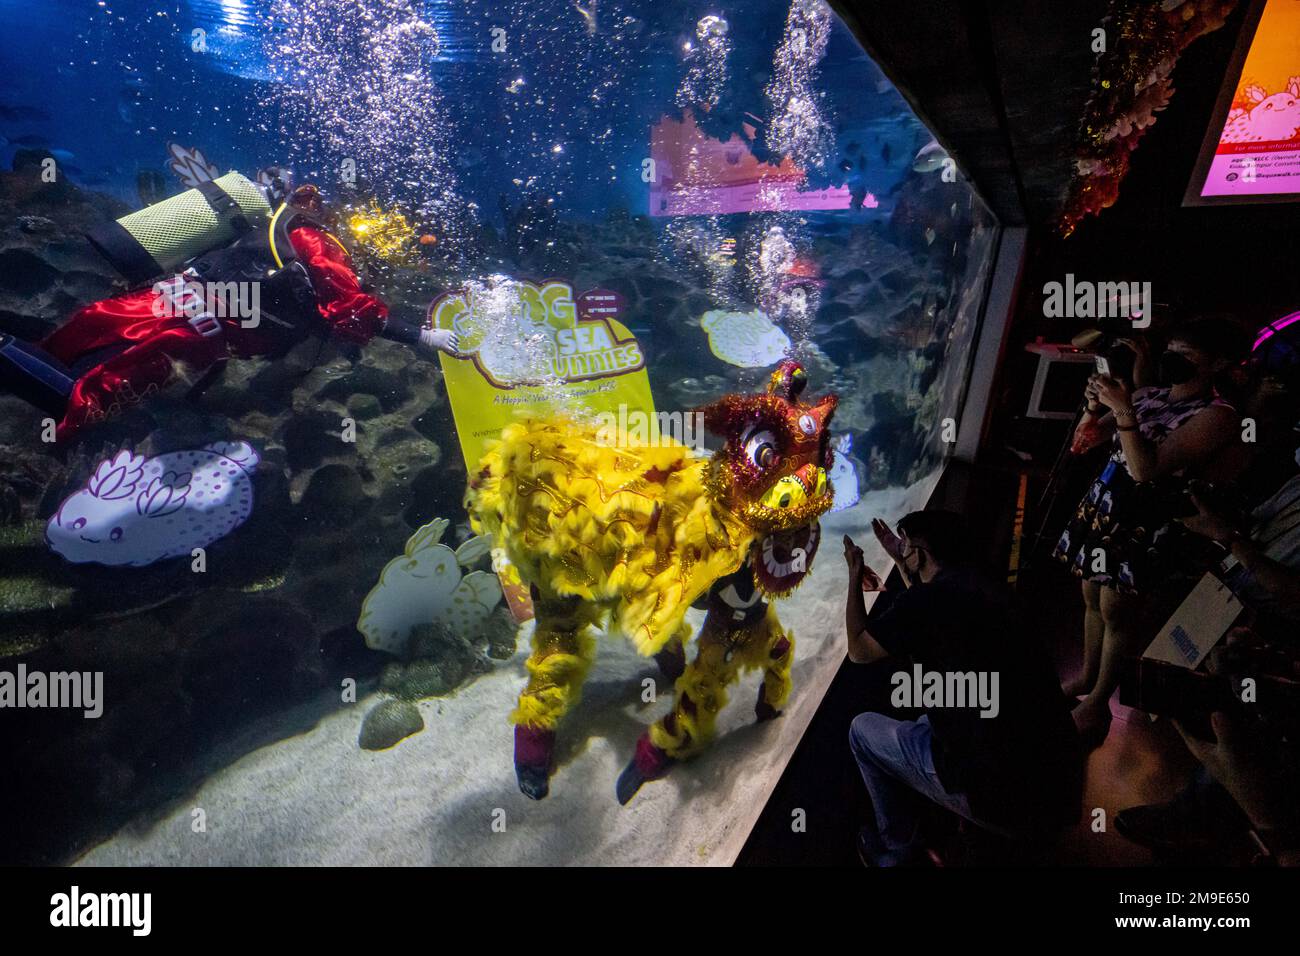 Kuala Lumpur, Malaysia. 18th Jan, 2023. Visitors take photos of divers who are dressed as a lion and a Fortune God during an underwater performance in celebration of the Lunar New Year at Aquaria KLCC in Kuala Lumpur, Malaysia, Jan. 18, 2023. Credit: Zhu Wei/Xinhua/Alamy Live News Stock Photo